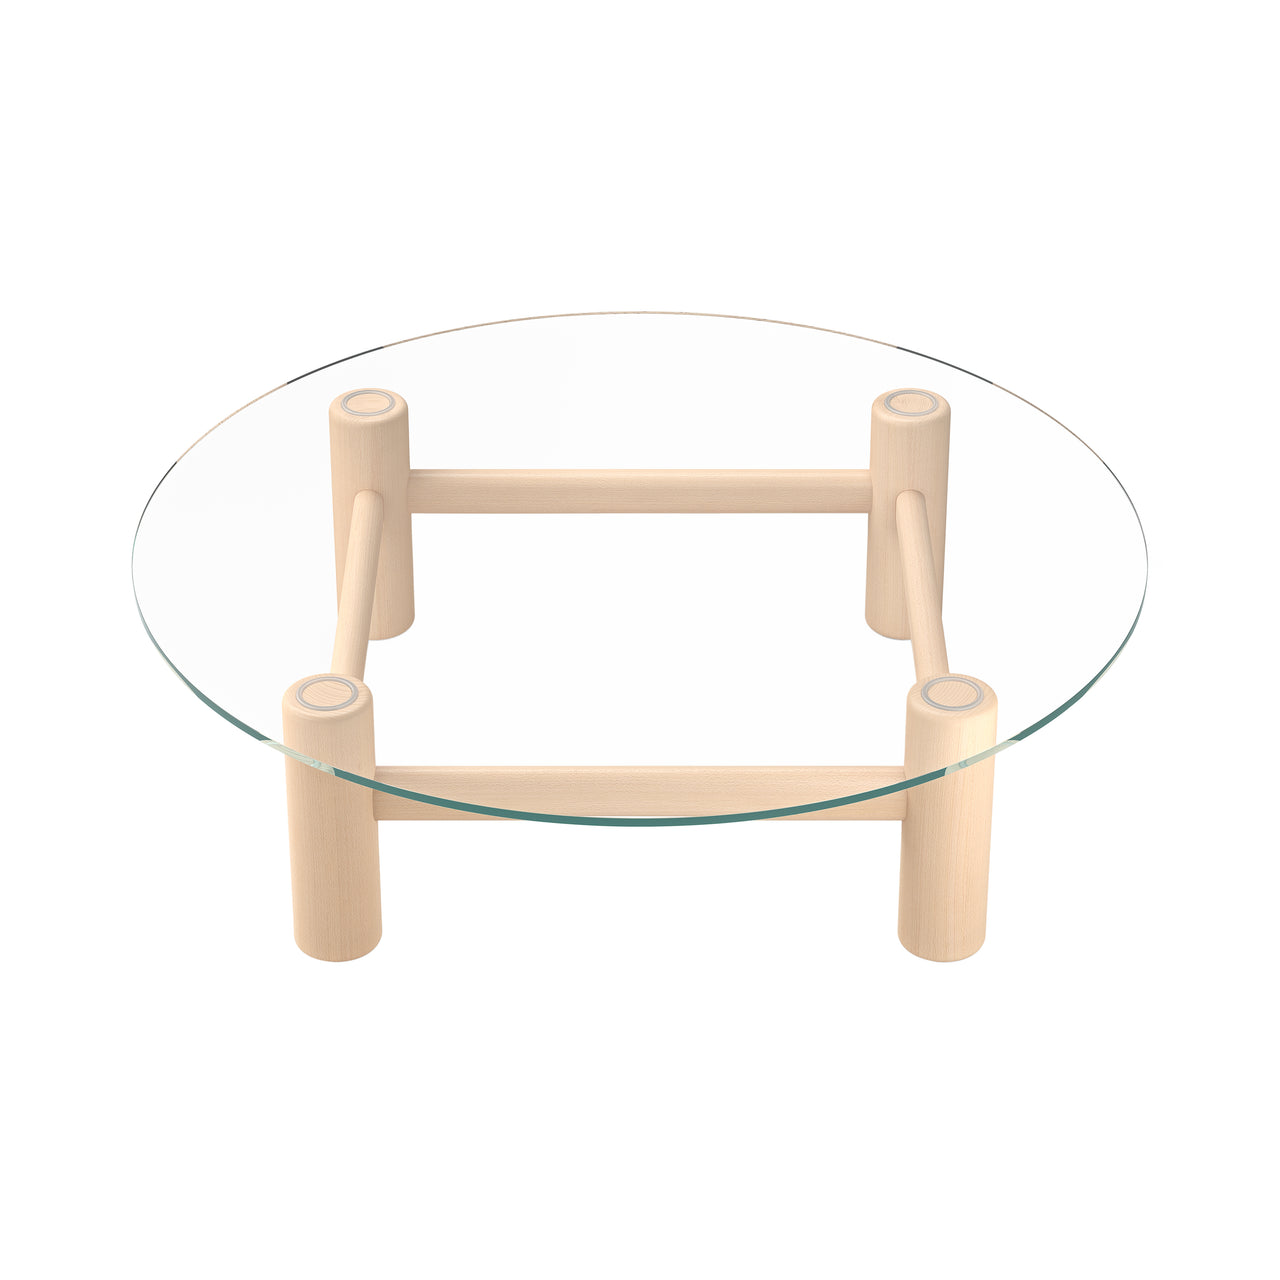 Boundary Coffee Table: Round + Natural Beech